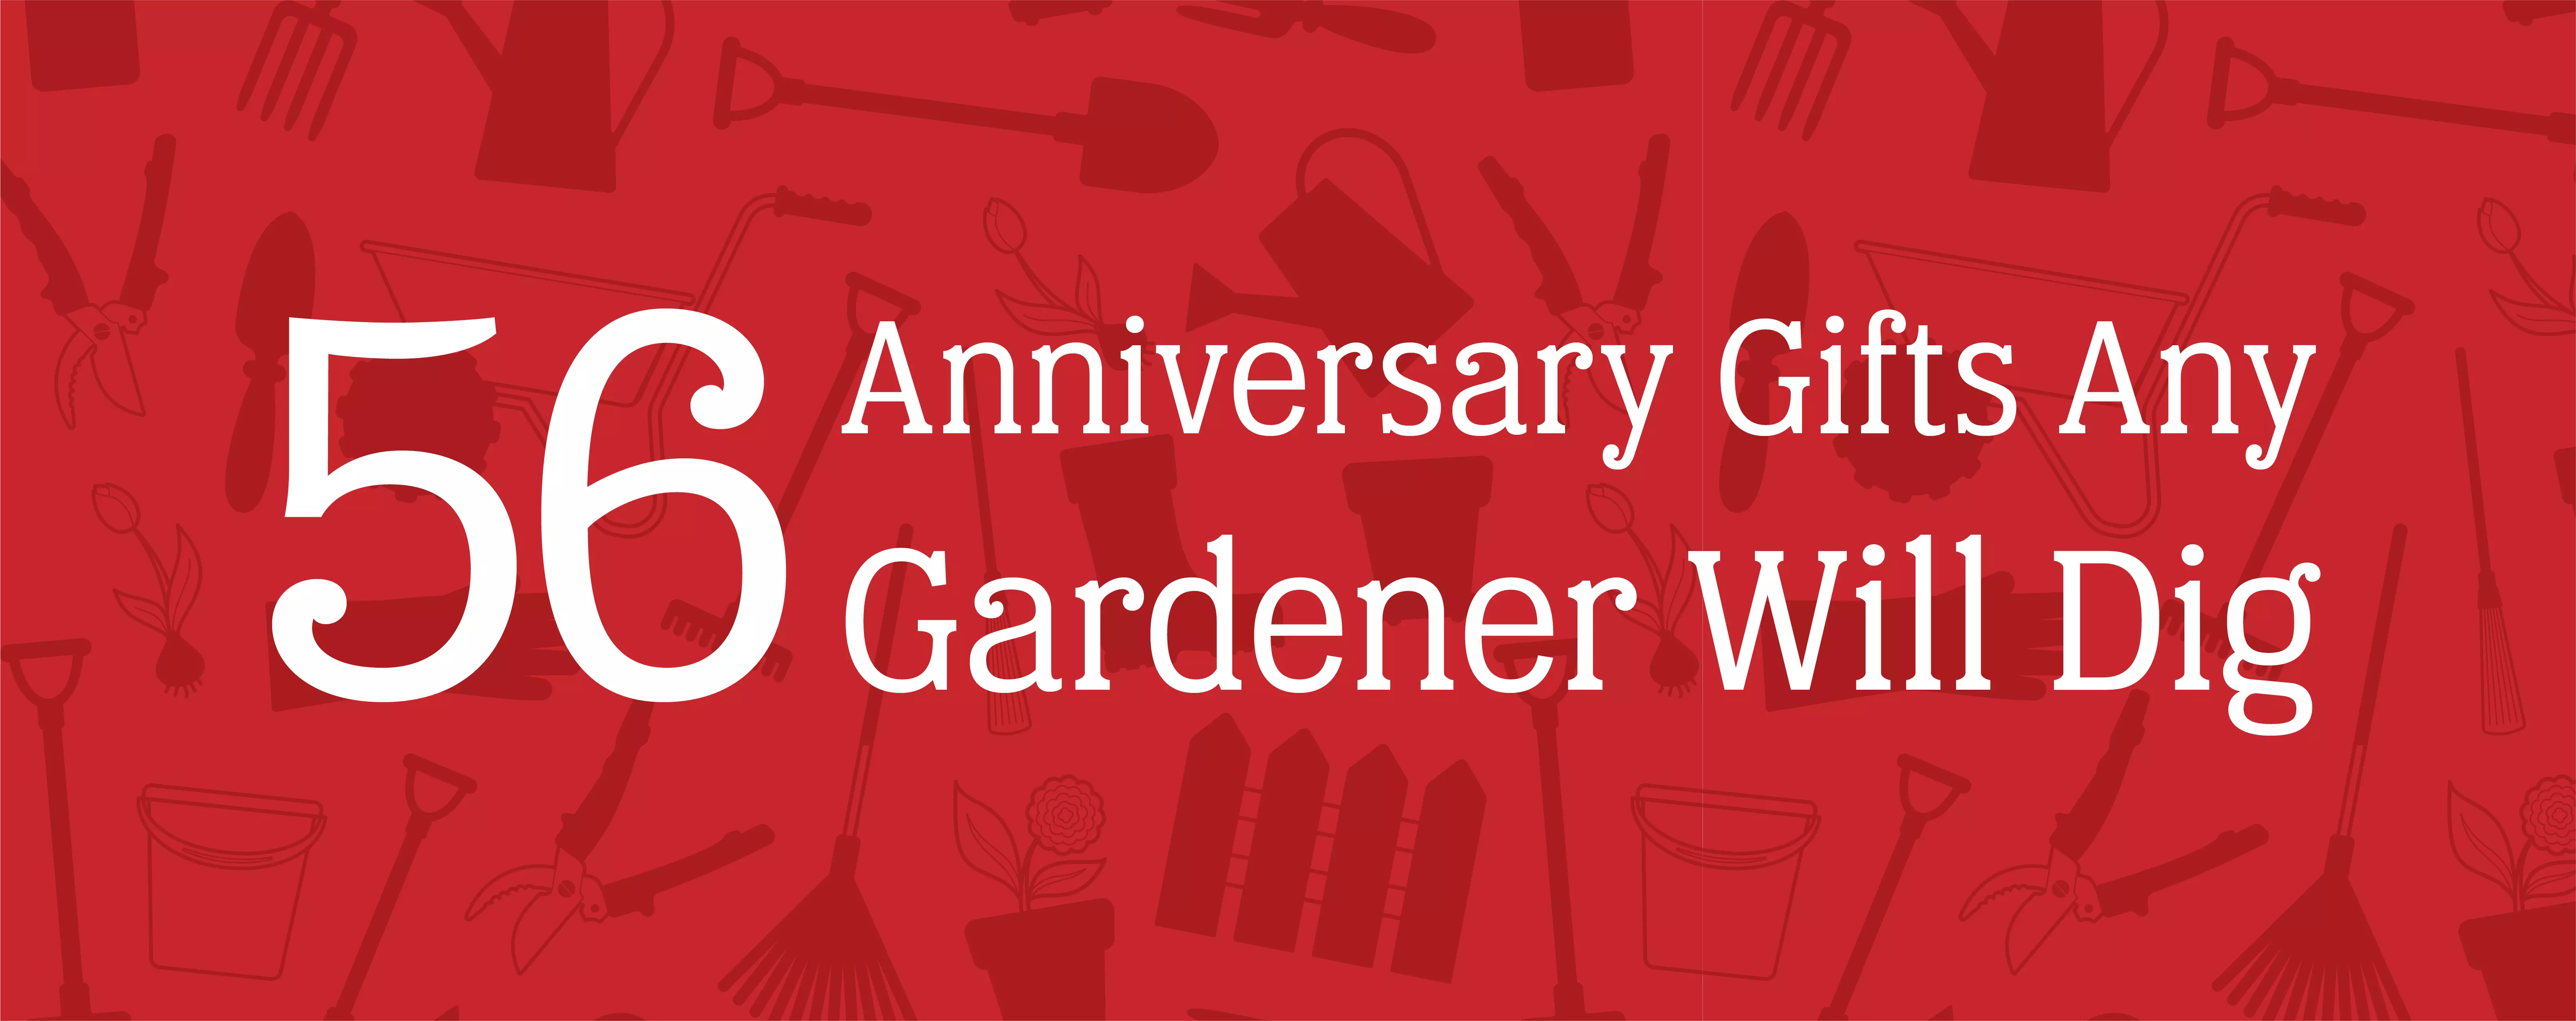 Red background featuring a pattern of gardening supplies with a white text overlay that reads "56 Anniversary Gifts Any Gardener Will Dig"